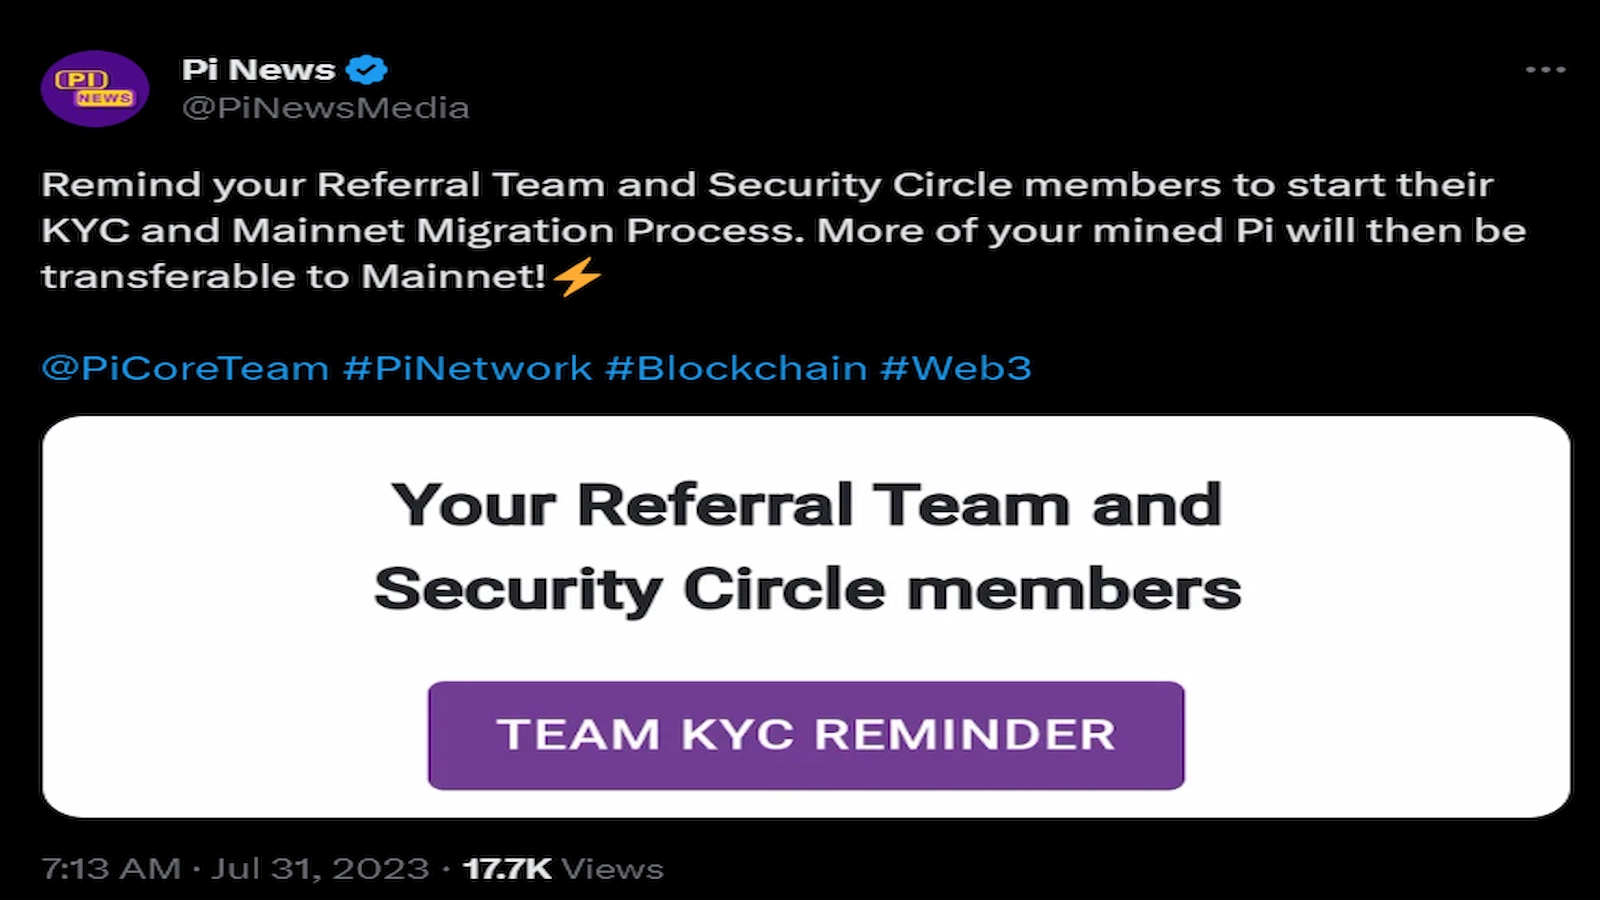 Pi Network asked users to start their KYC and mainnet migration.